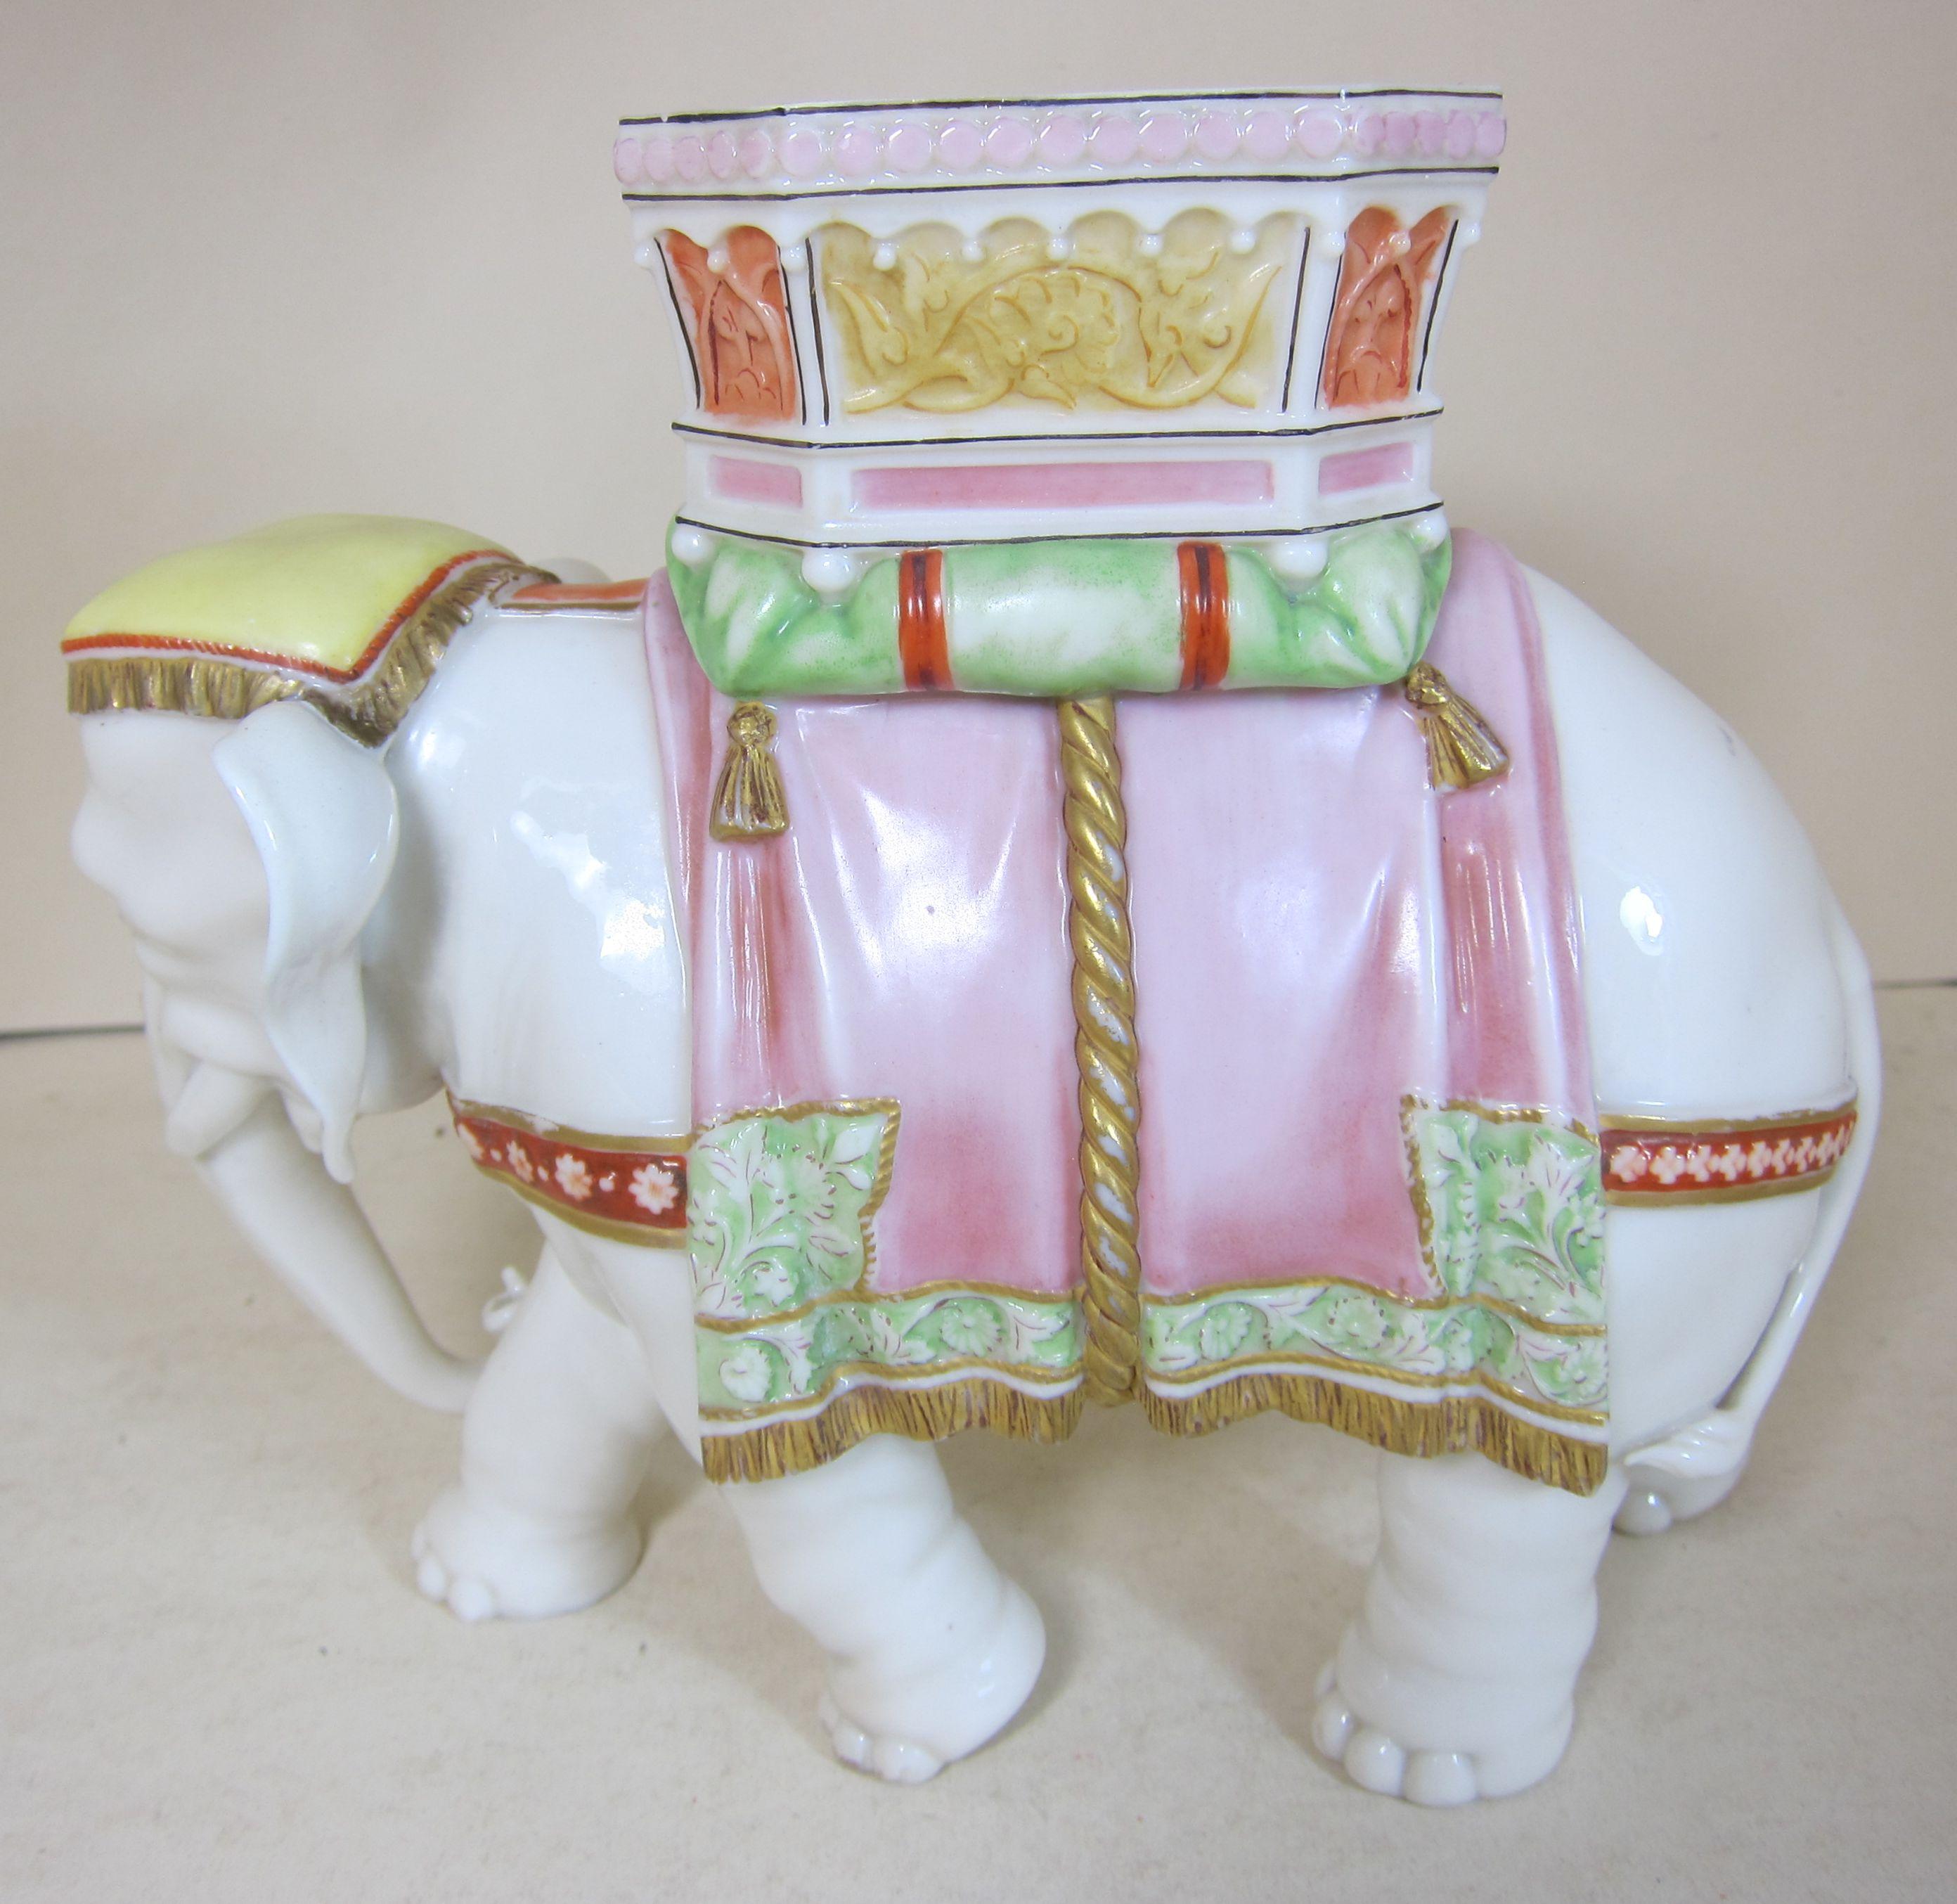 A Royal Worcester porcelain figure of an elephant in full colored ceremonial dress modelled by James Bradley.